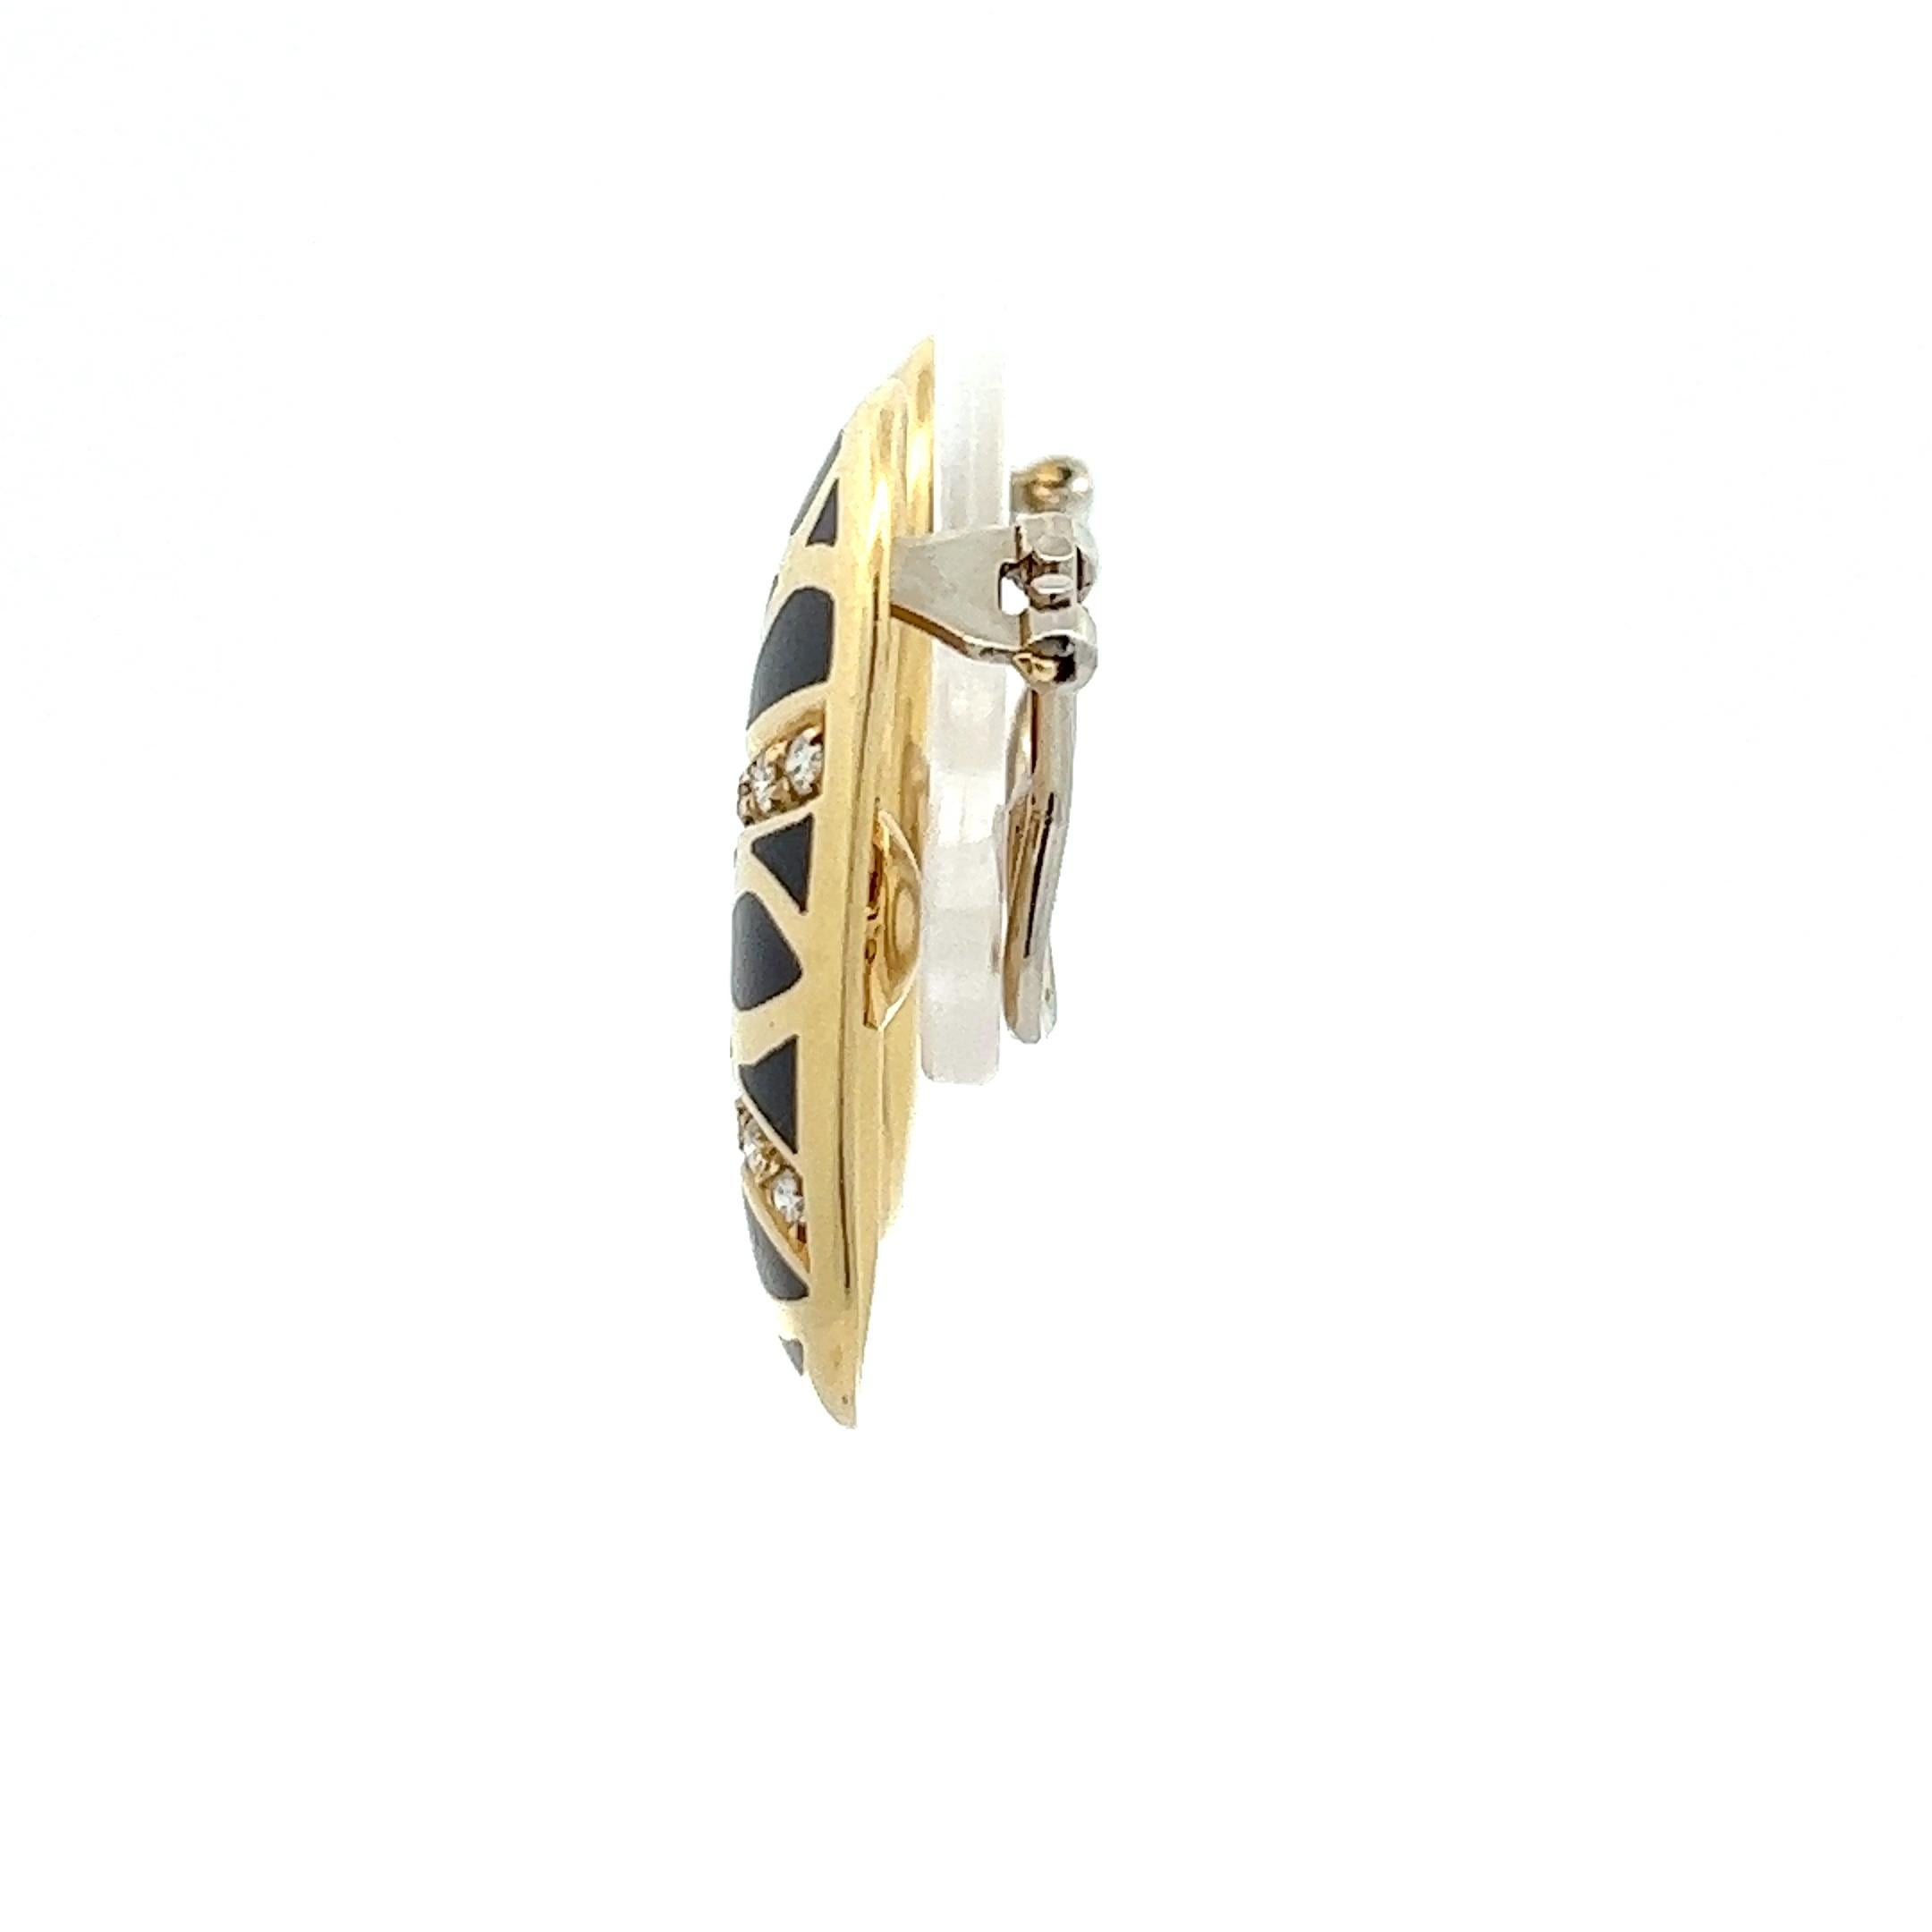 Brilliant Cut A pair of 18k yellow gold, Diamond and black enamel ear clips by Illario. For Sale